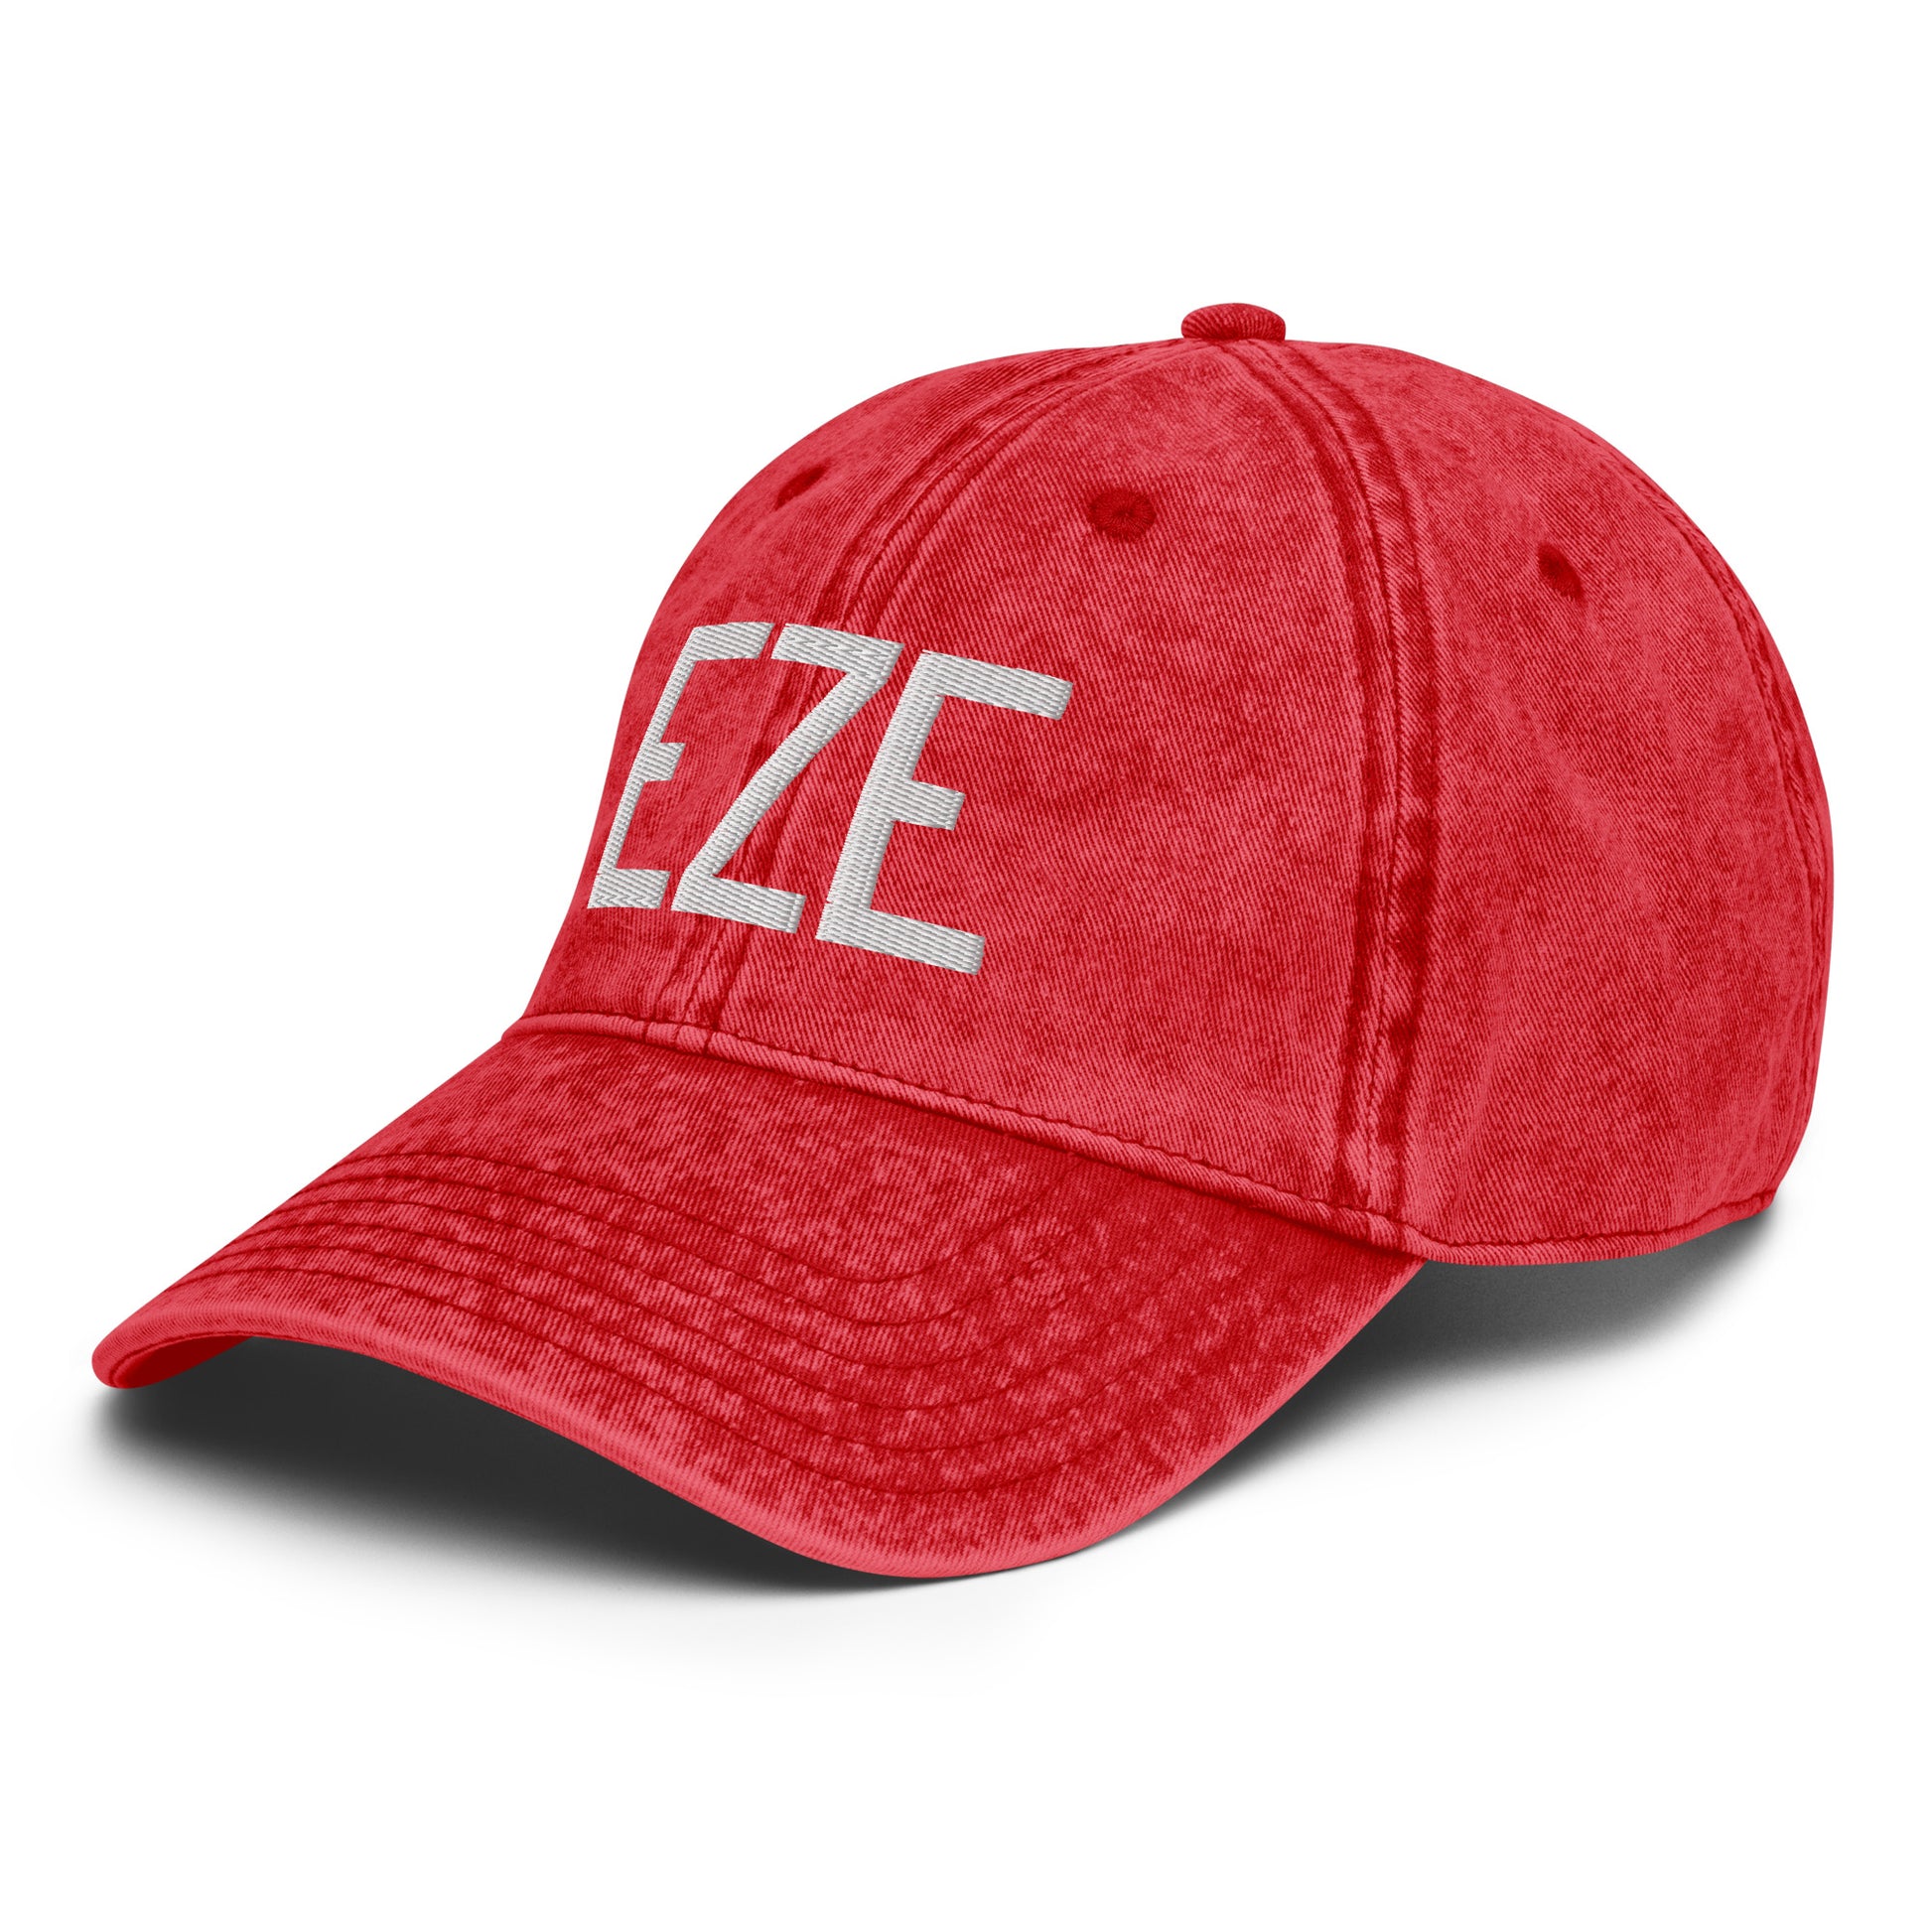 Airport Code Twill Cap - White • EZE Buenos Aires • YHM Designs - Image 23